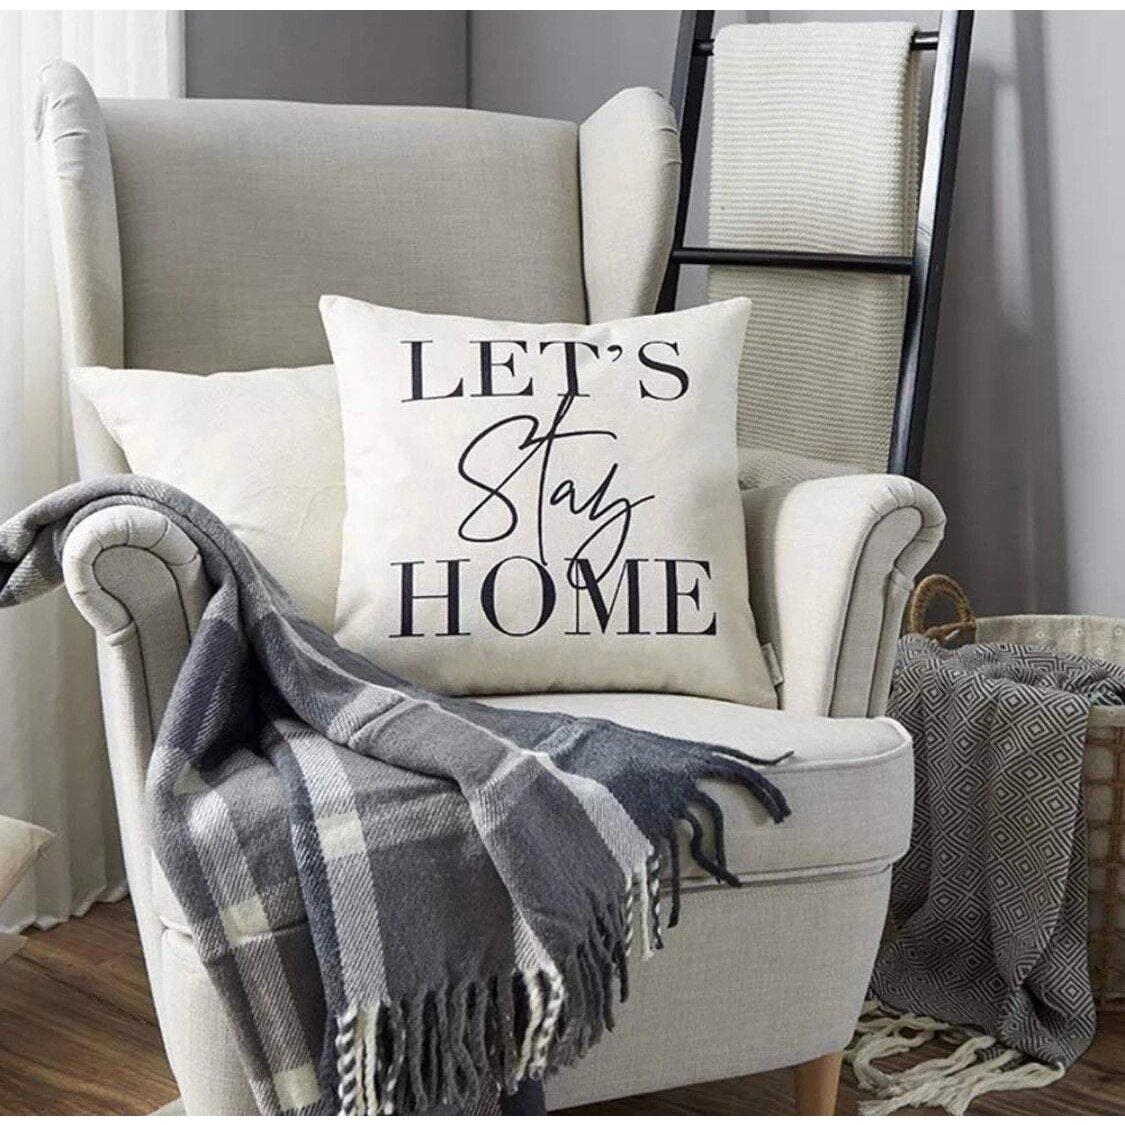 Cream throw cushion with black 'Lets Stay Home' text, on a grey armchair with a tartan blanket, in a living room setting.